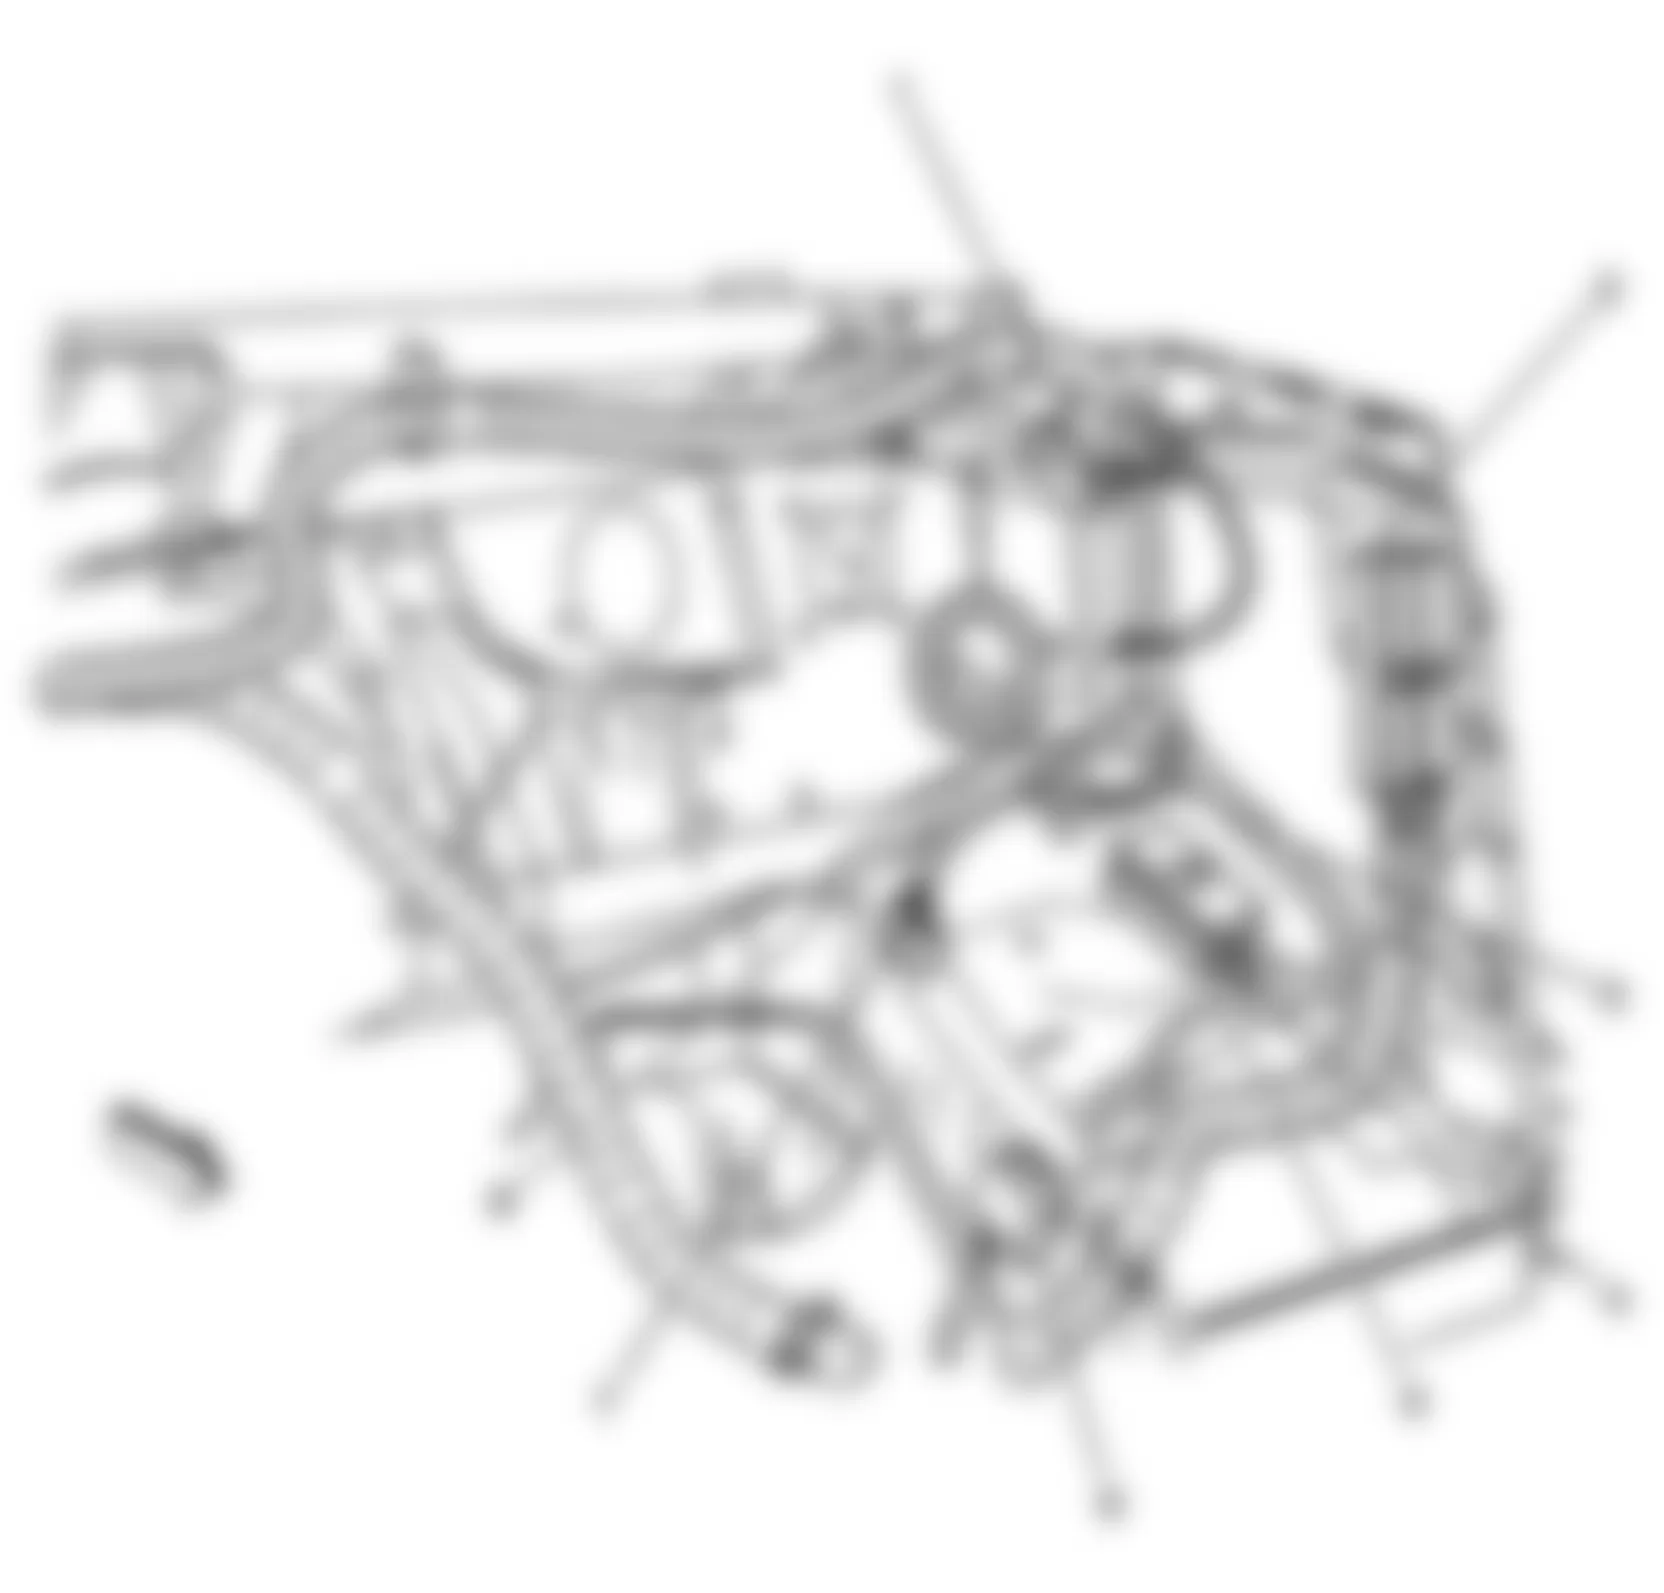 GMC Savana G3500 2008 - Component Locations -  Left Rear Of Engine Compartment